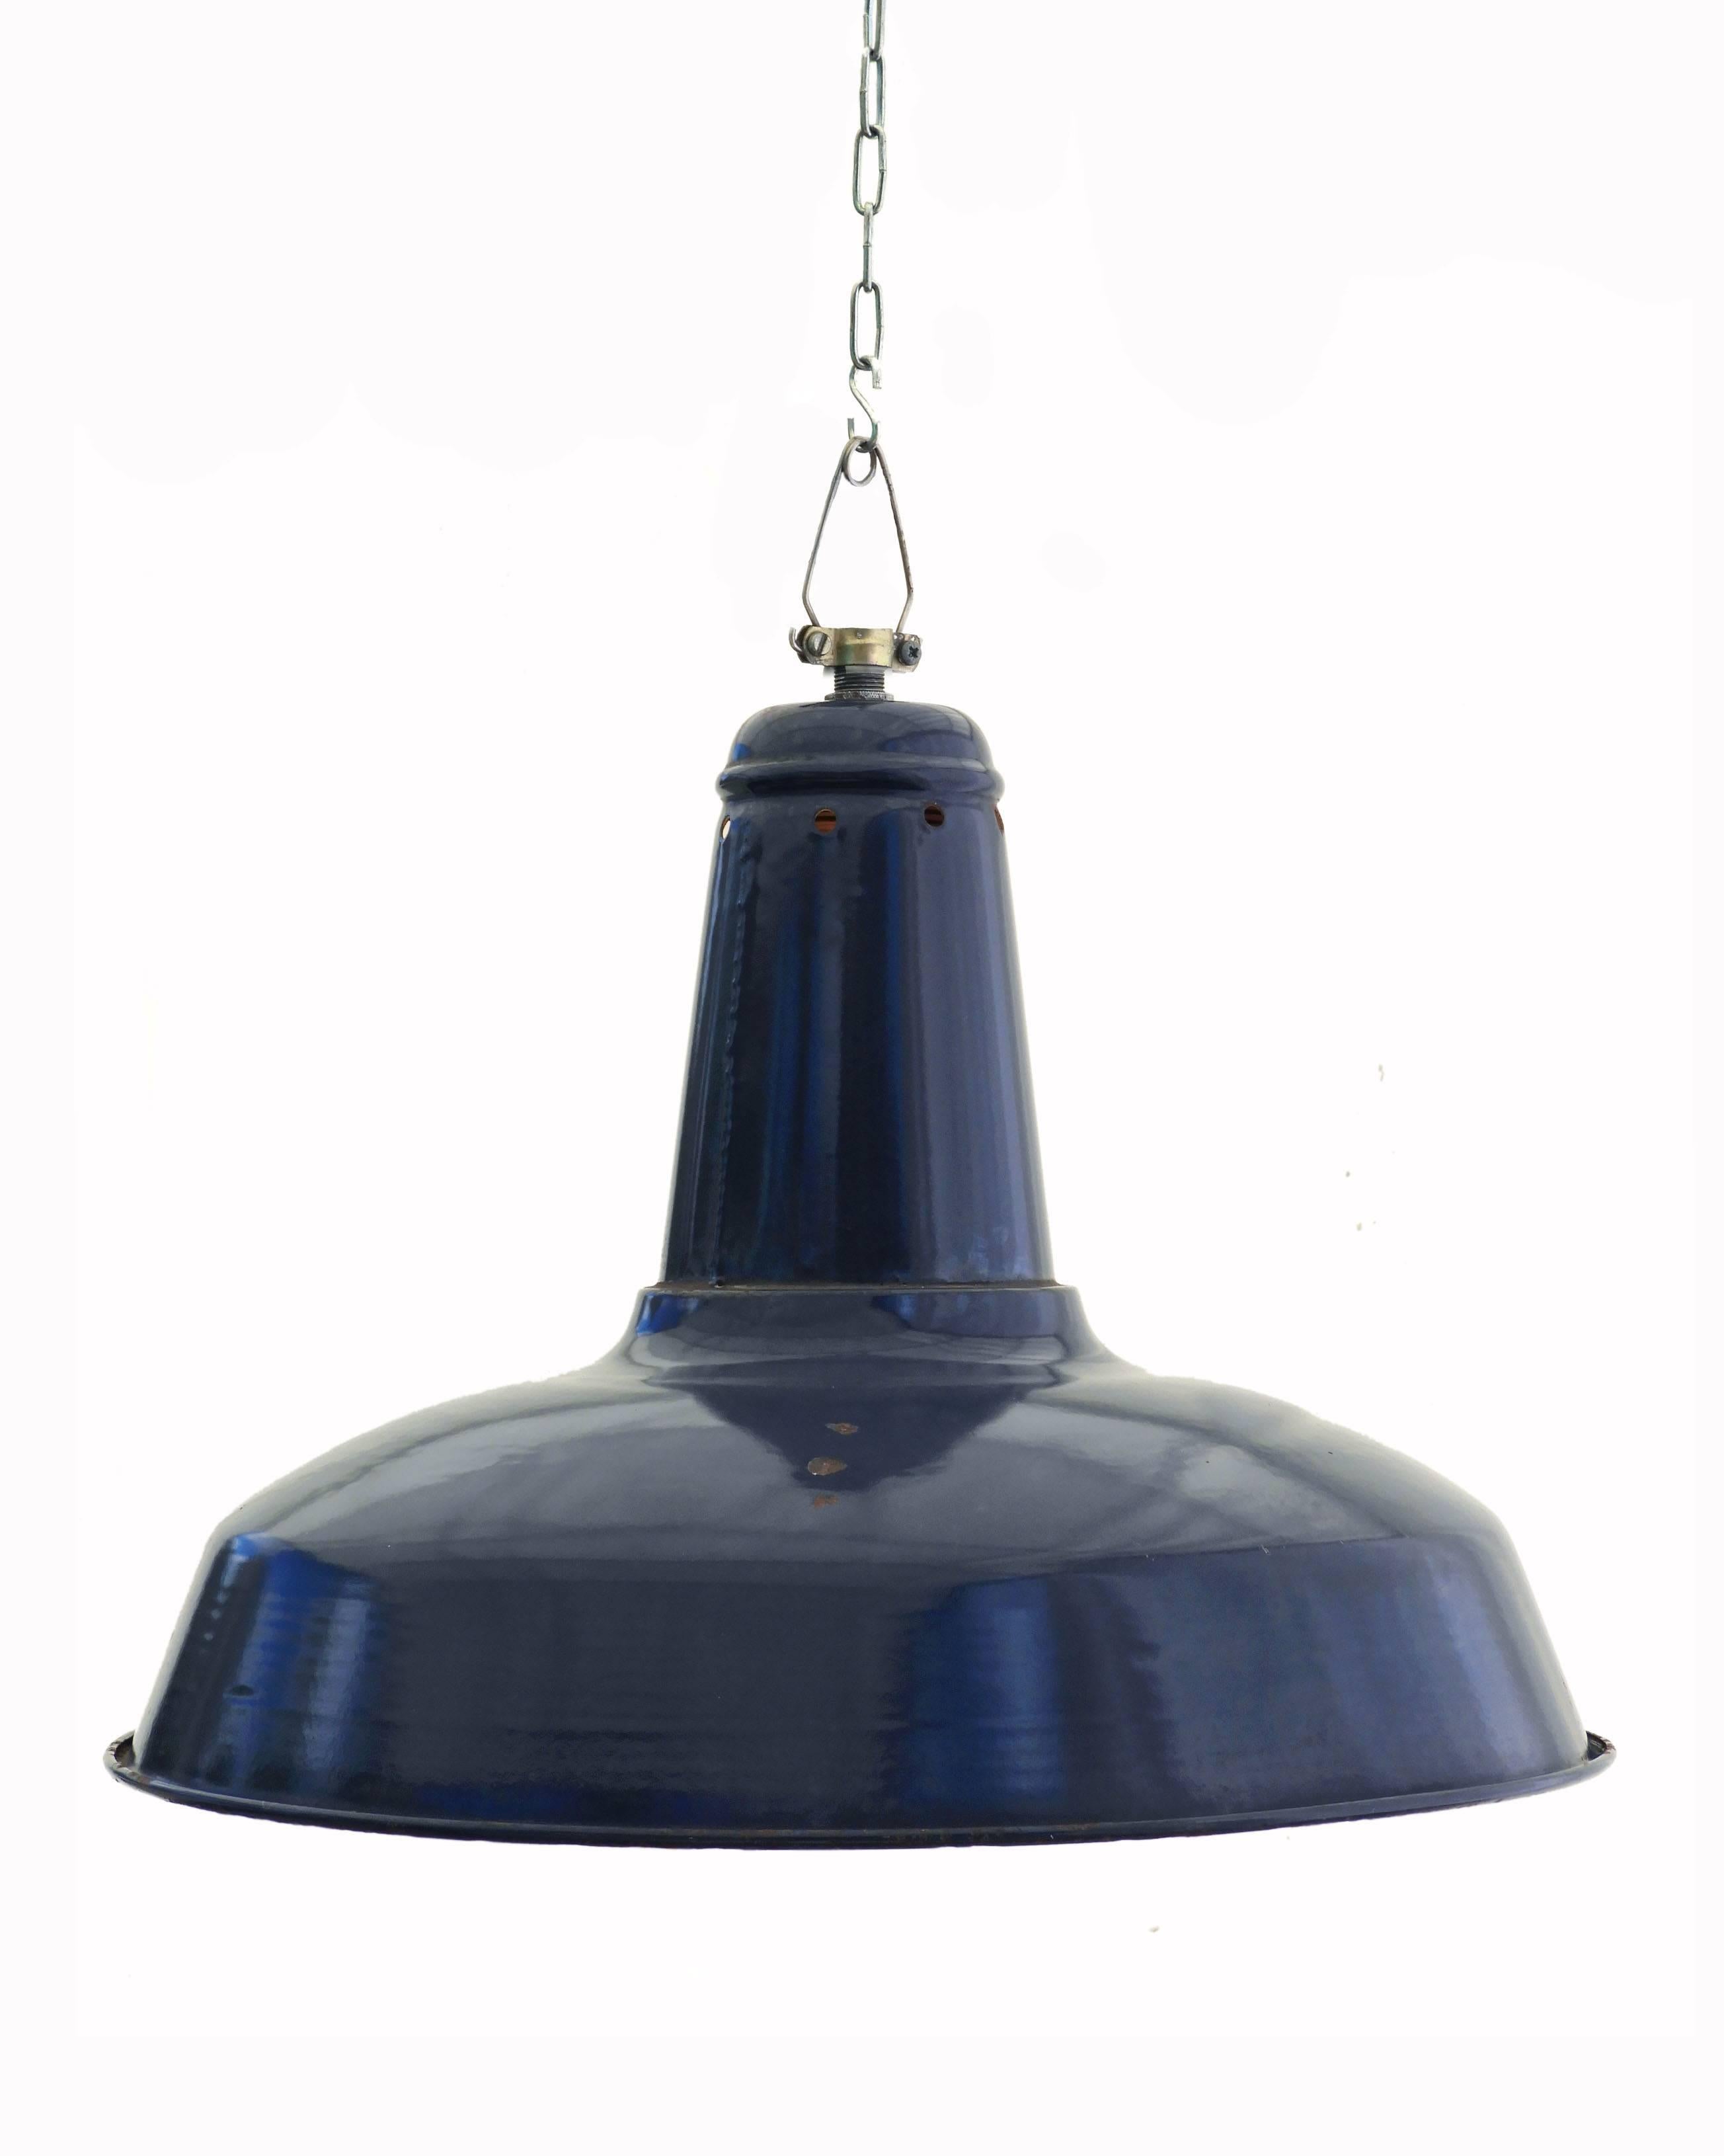 Large Industrial pendant ceiling light midcentury French Factory Blue enamel loft lighting fixture
Original Industrial fitting will take a bulb up to 500w to light a very large area
In good vintage condition some minor chipping of original enamel